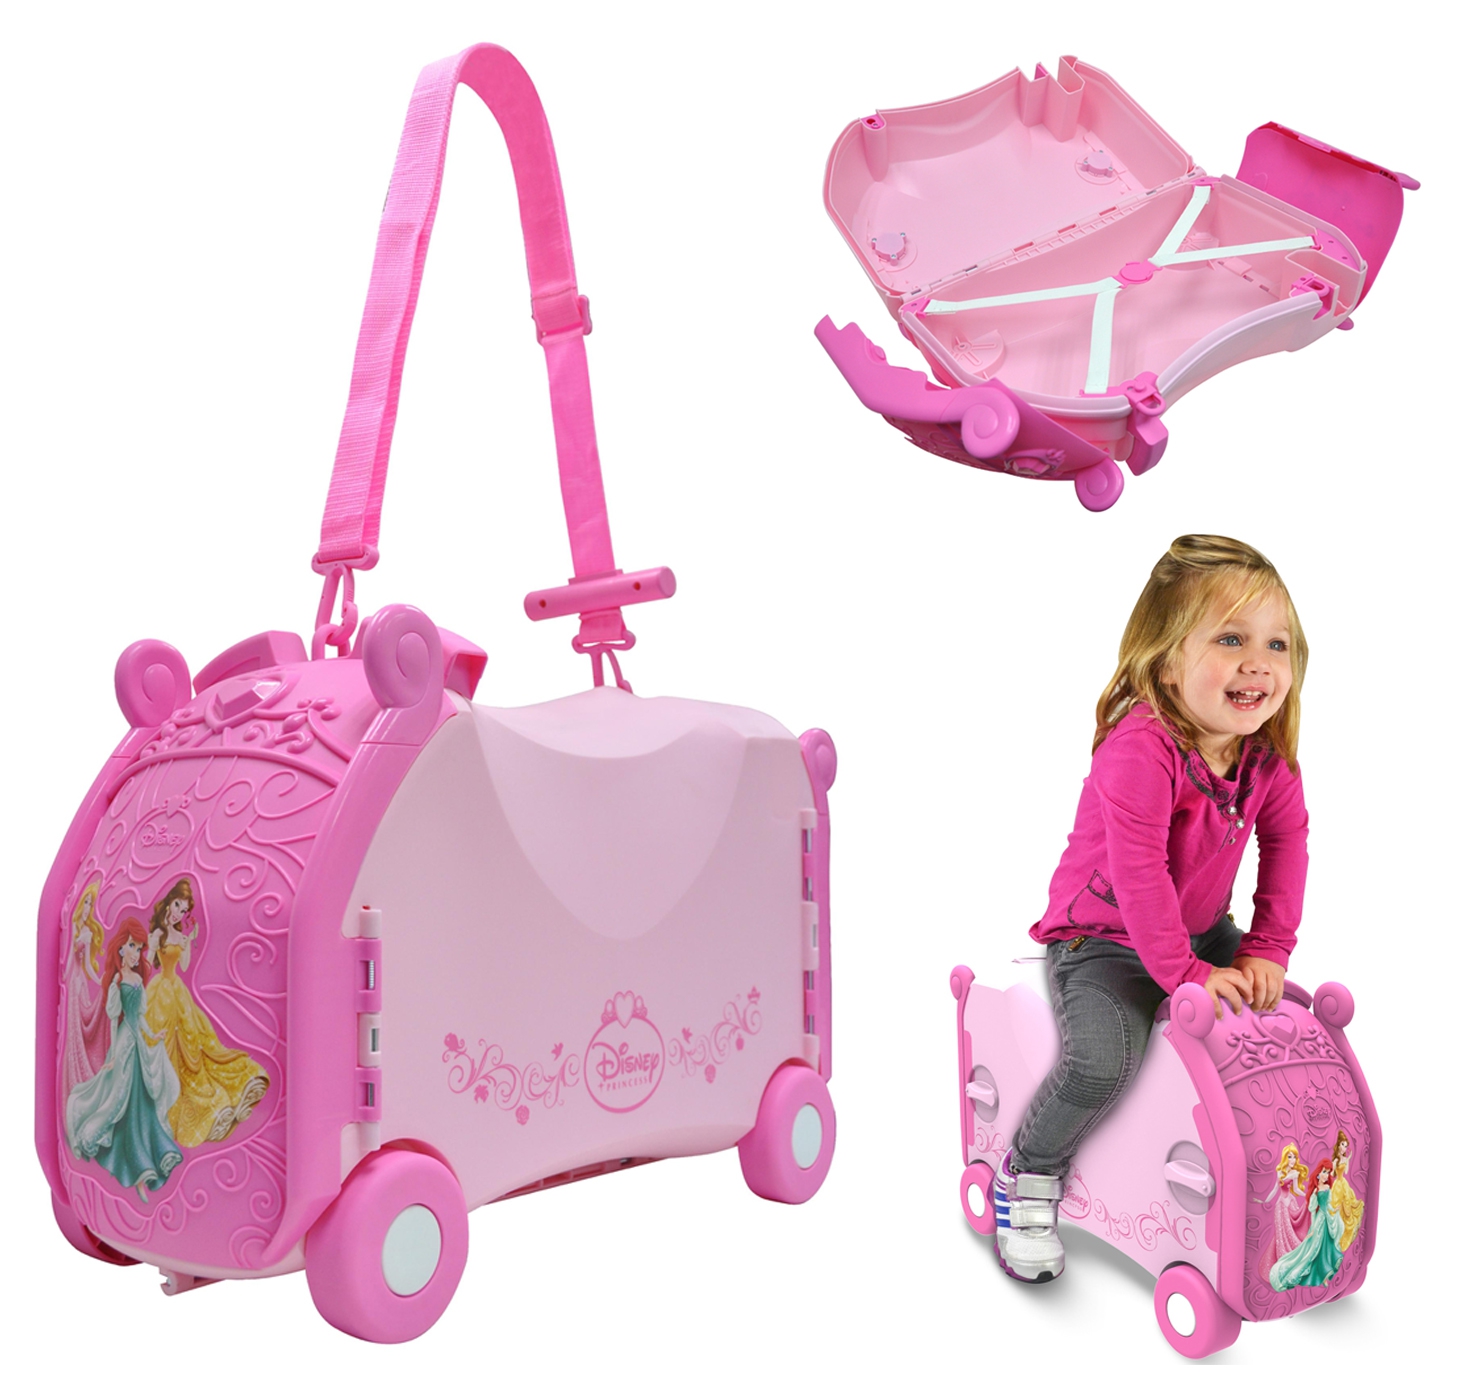 Disney 'Princess' Pull Along Suitcase Hand Luggage Ride on Toy Box Ages 3 To 6 Years